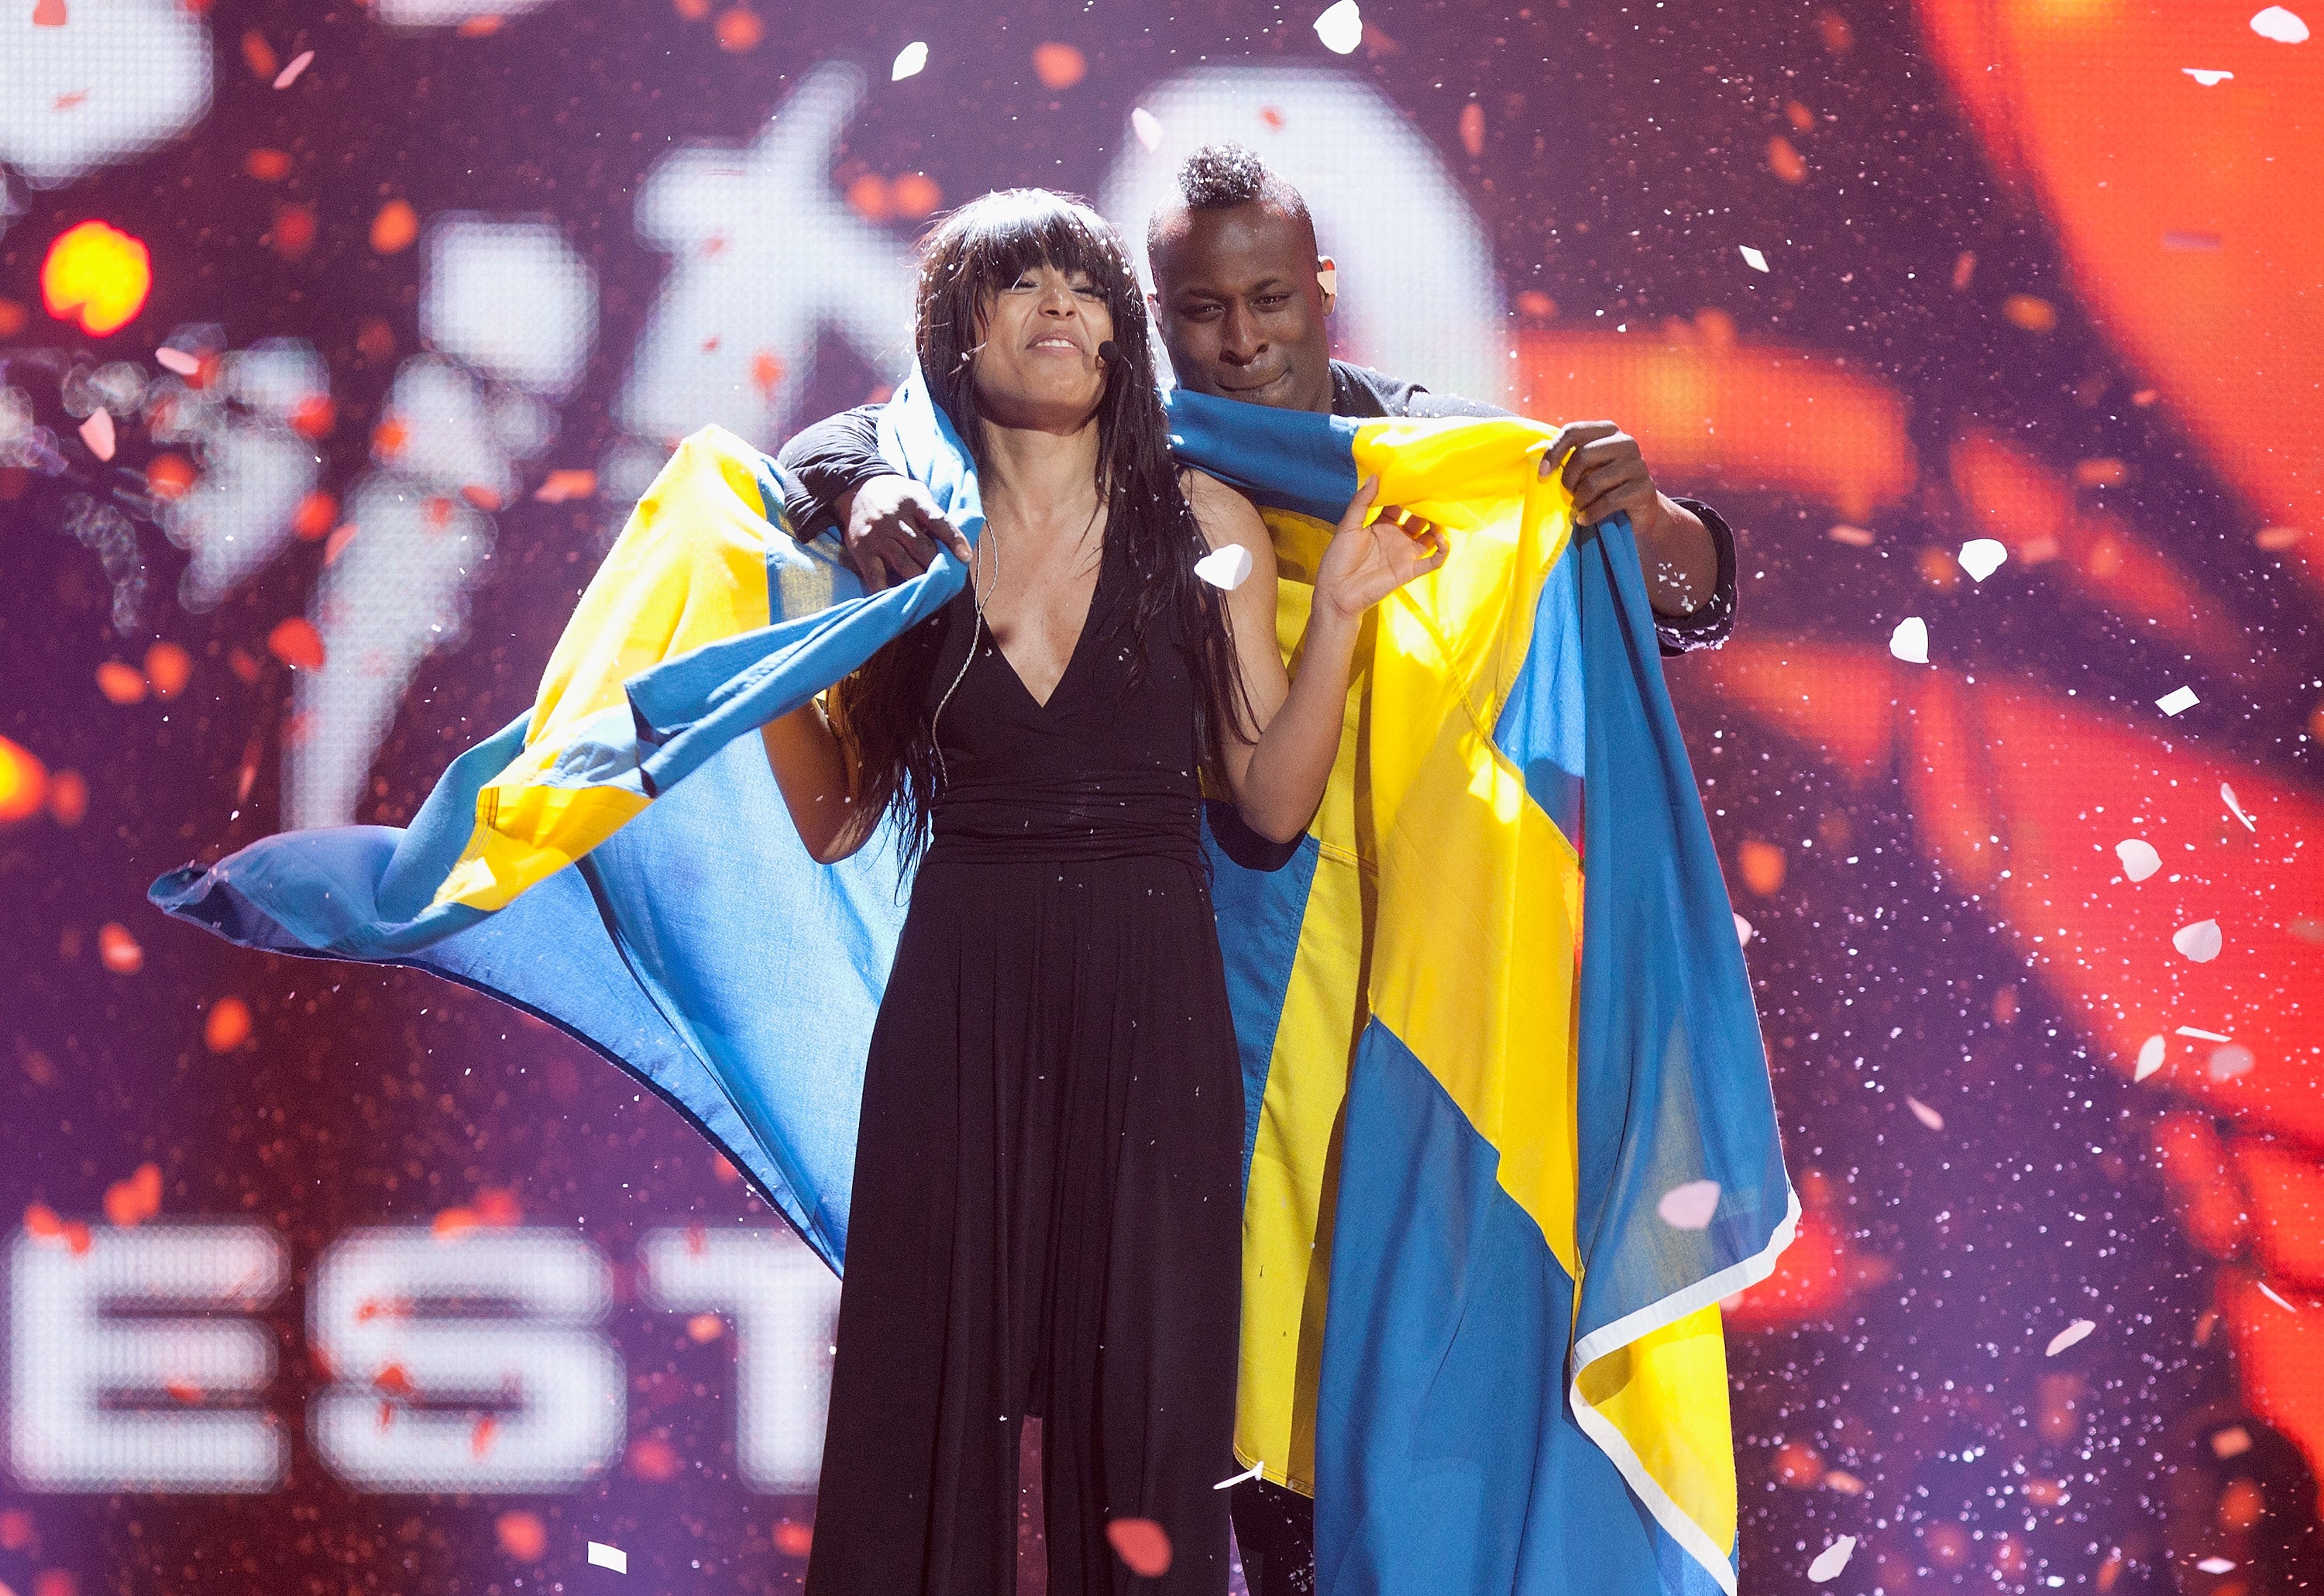 Loreen won Eurovision for Sweden in 2012